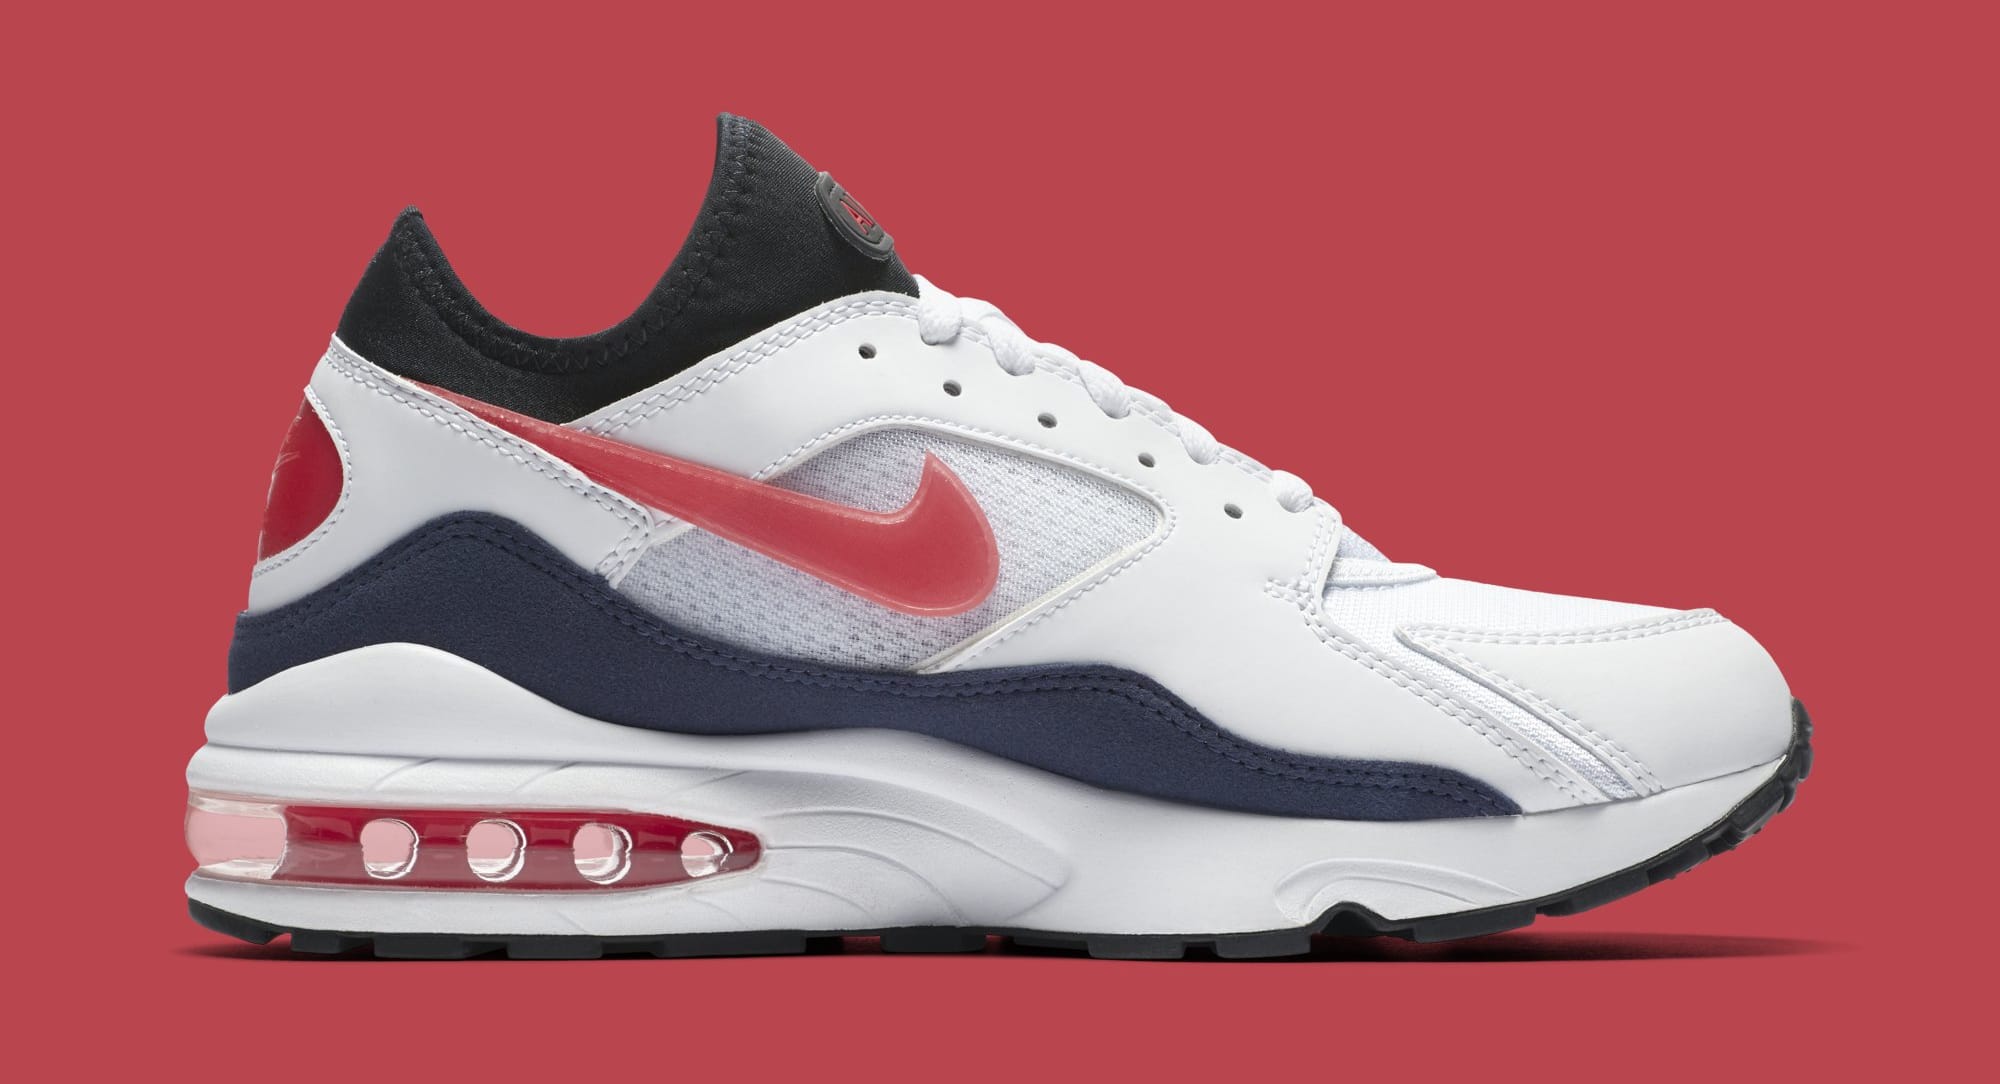 The Nike Air Max 93 Is Back, and it Still Looks Brand New